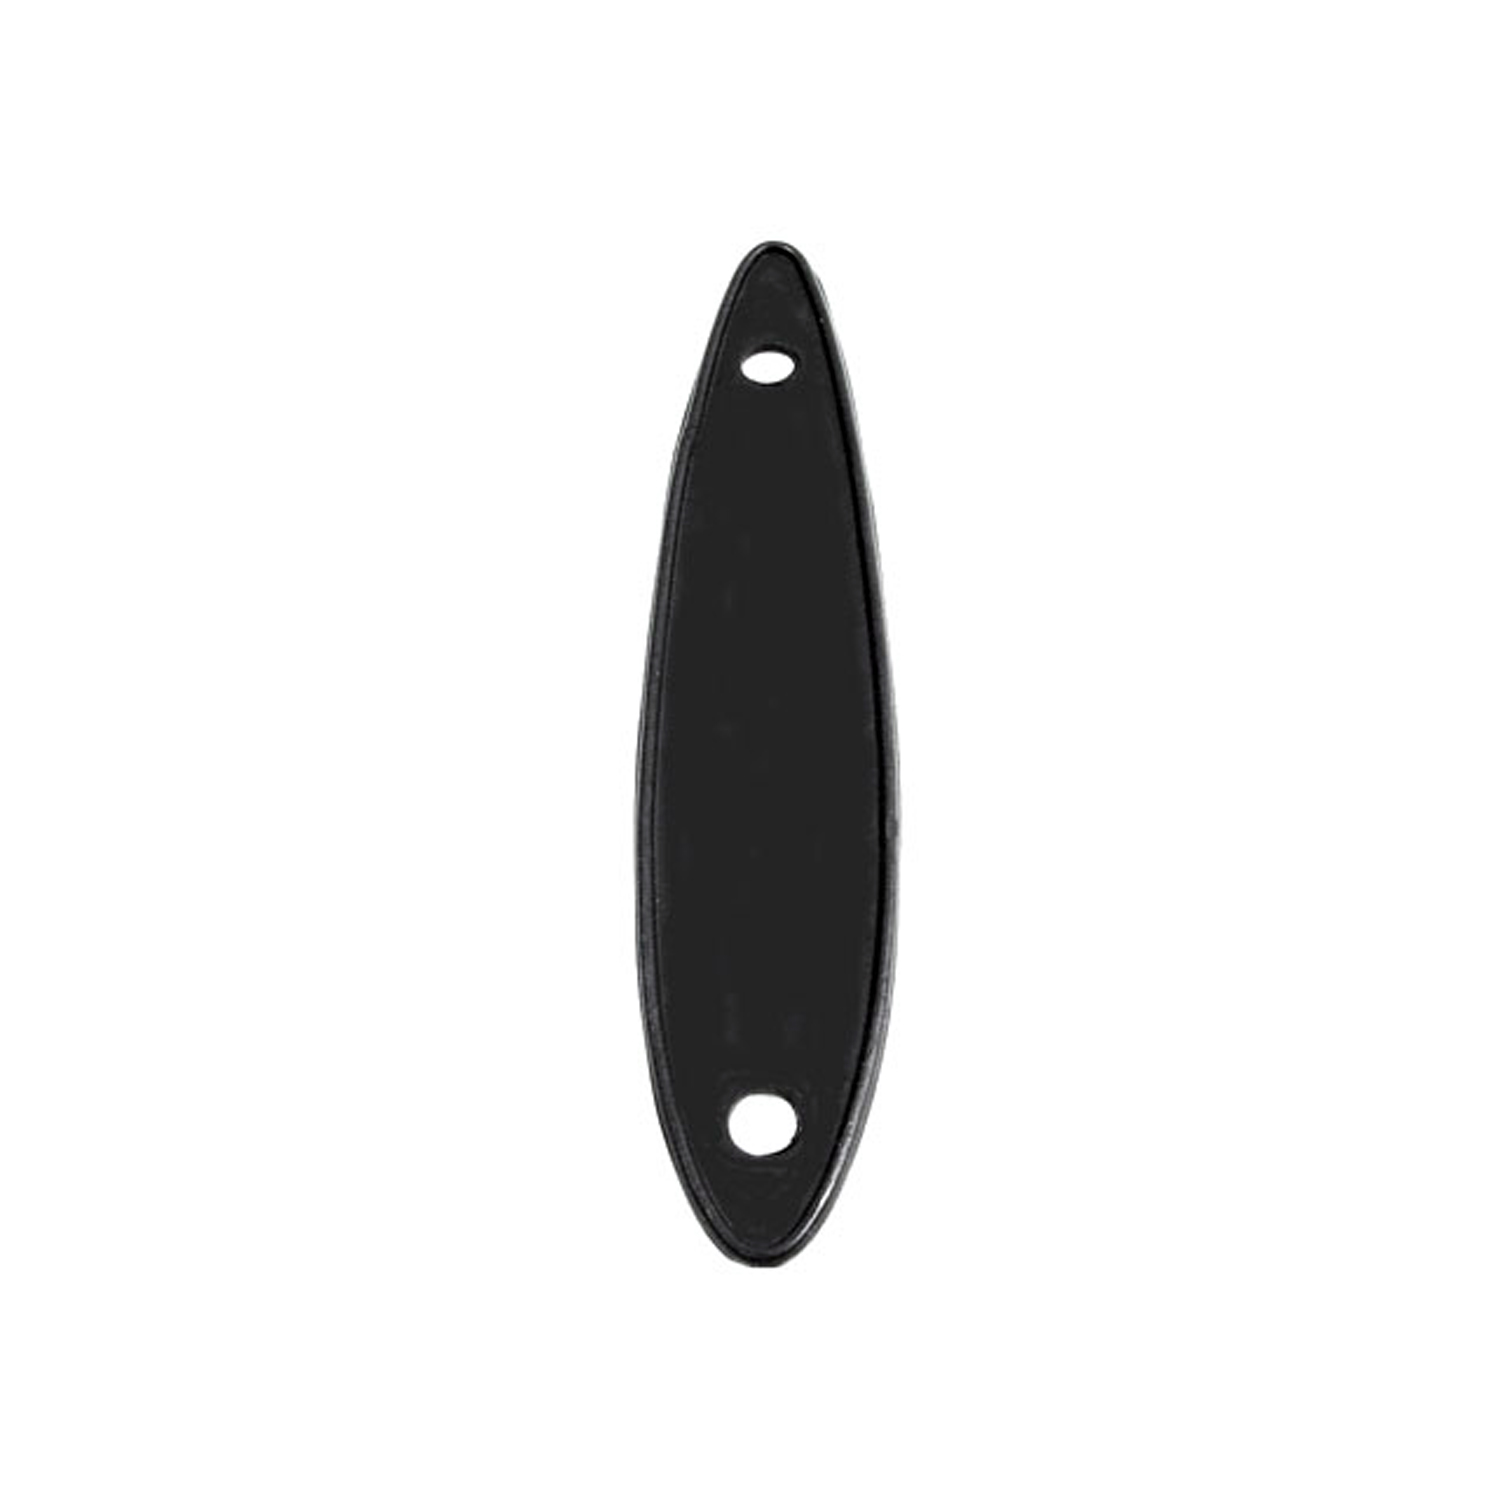 1956 Ford Courier Sedan Delivery Mirror-on-door mounting pad. Fits models with  6-3/8 in-MP 996-R